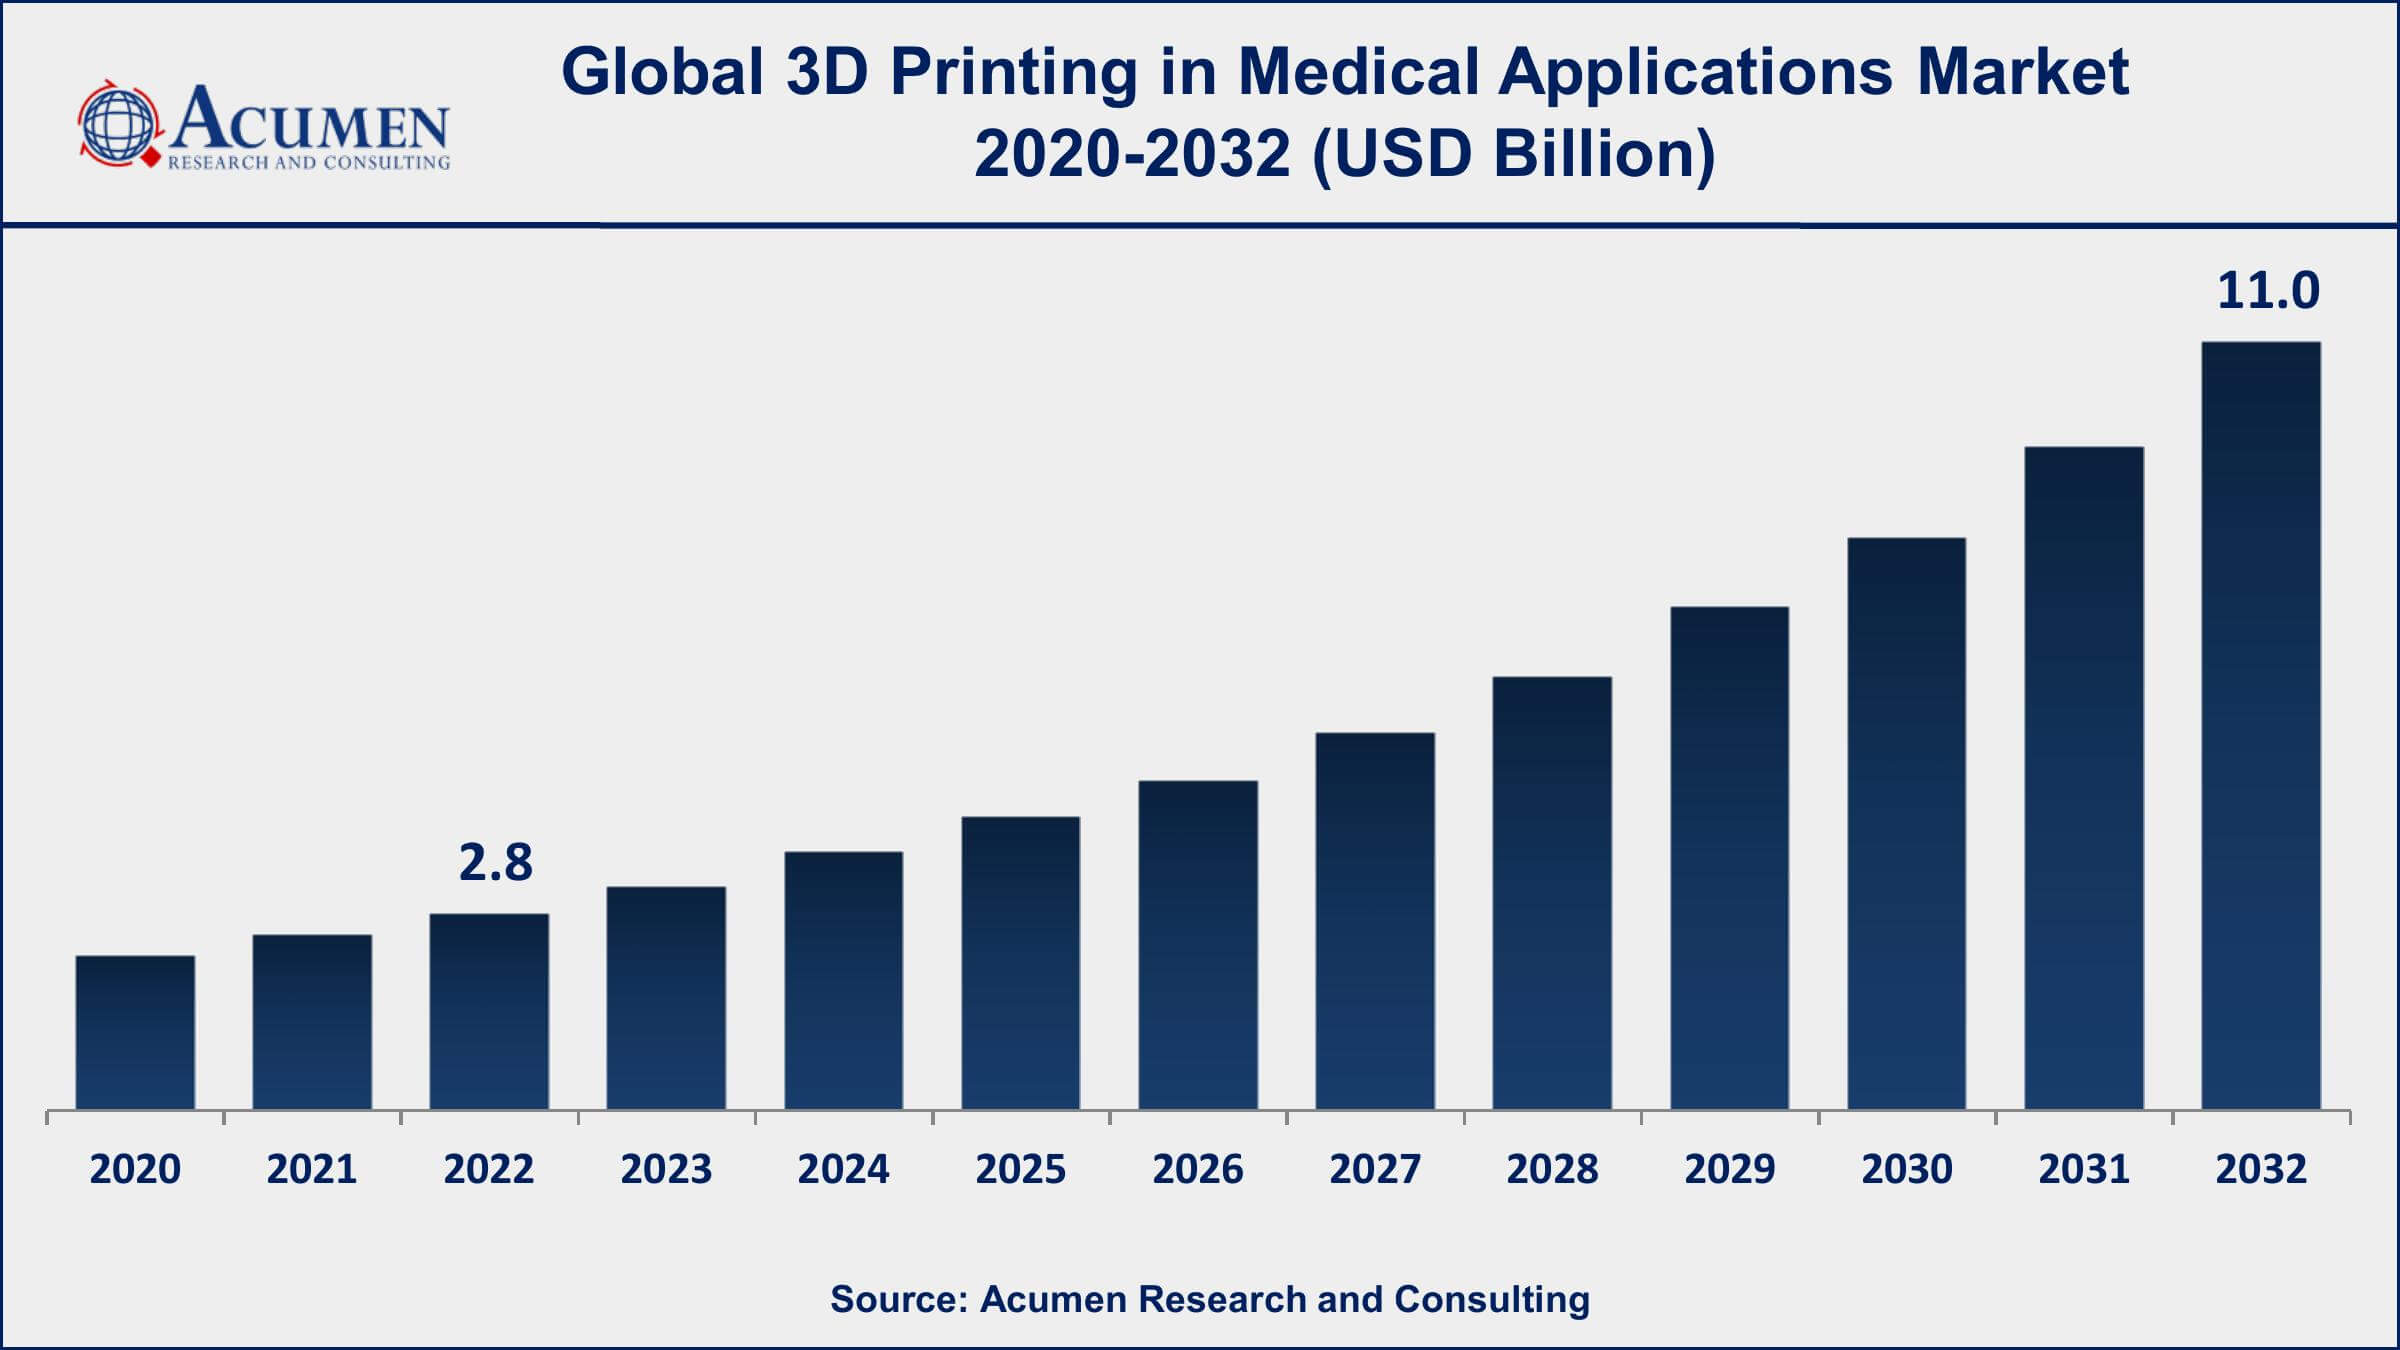 3D Printing in Medical Applications Market Drivers